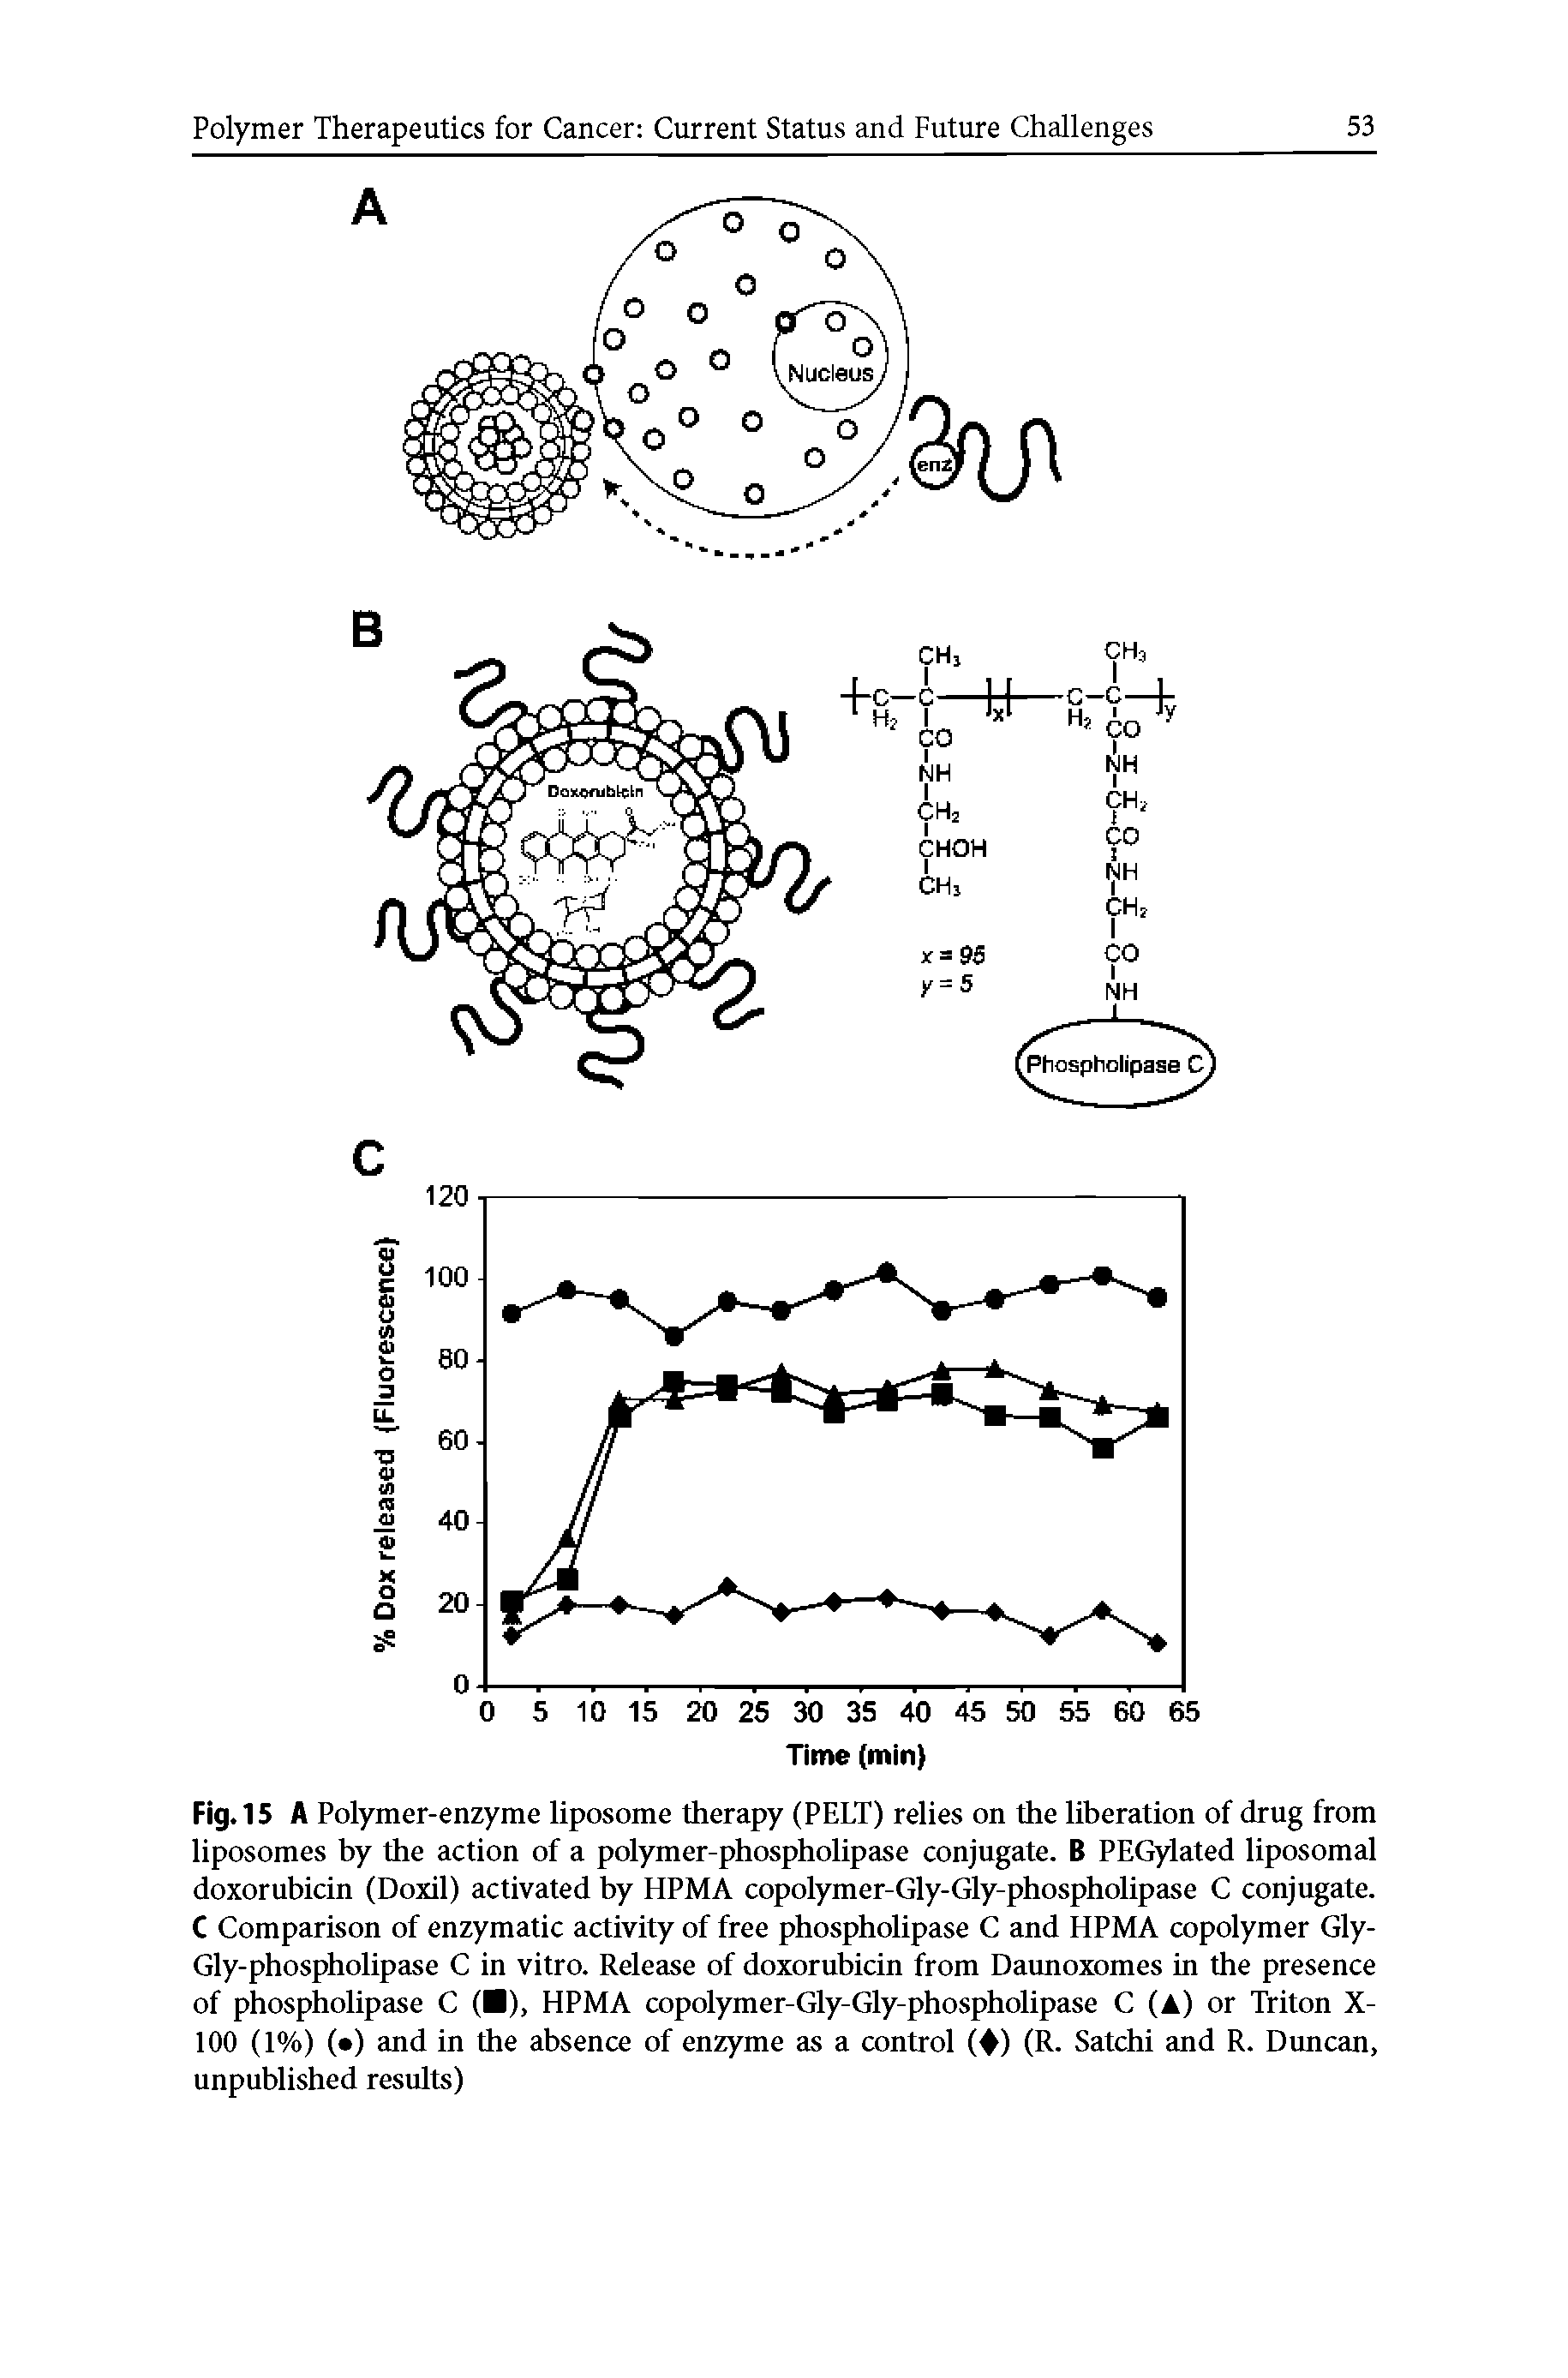 Fig. 15 A Polymer-enzyme liposome therapy (PELT) relies on the liberation of drug from liposomes by the action of a polymer-phospholipase conjugate. B PEGylated liposomal doxorubicin (Doxil) activated by HPMA copolymer-Gly-Gly-phospholipase C conjugate. C Comparison of enzymatic activity of free phospholipase C and HPMA copolymer Gly-Gly-phospholipase C in vitro. Release of doxorubicin from Daunoxomes in the presence of phospholipase C ( ), HPMA copolymer-Gly-Gly-phospholipase C (A) or Triton X-100 (1%) ( ) and in the absence of enzyme as a control ( ) (R. Satchi and R. Duncan, unpublished results)...